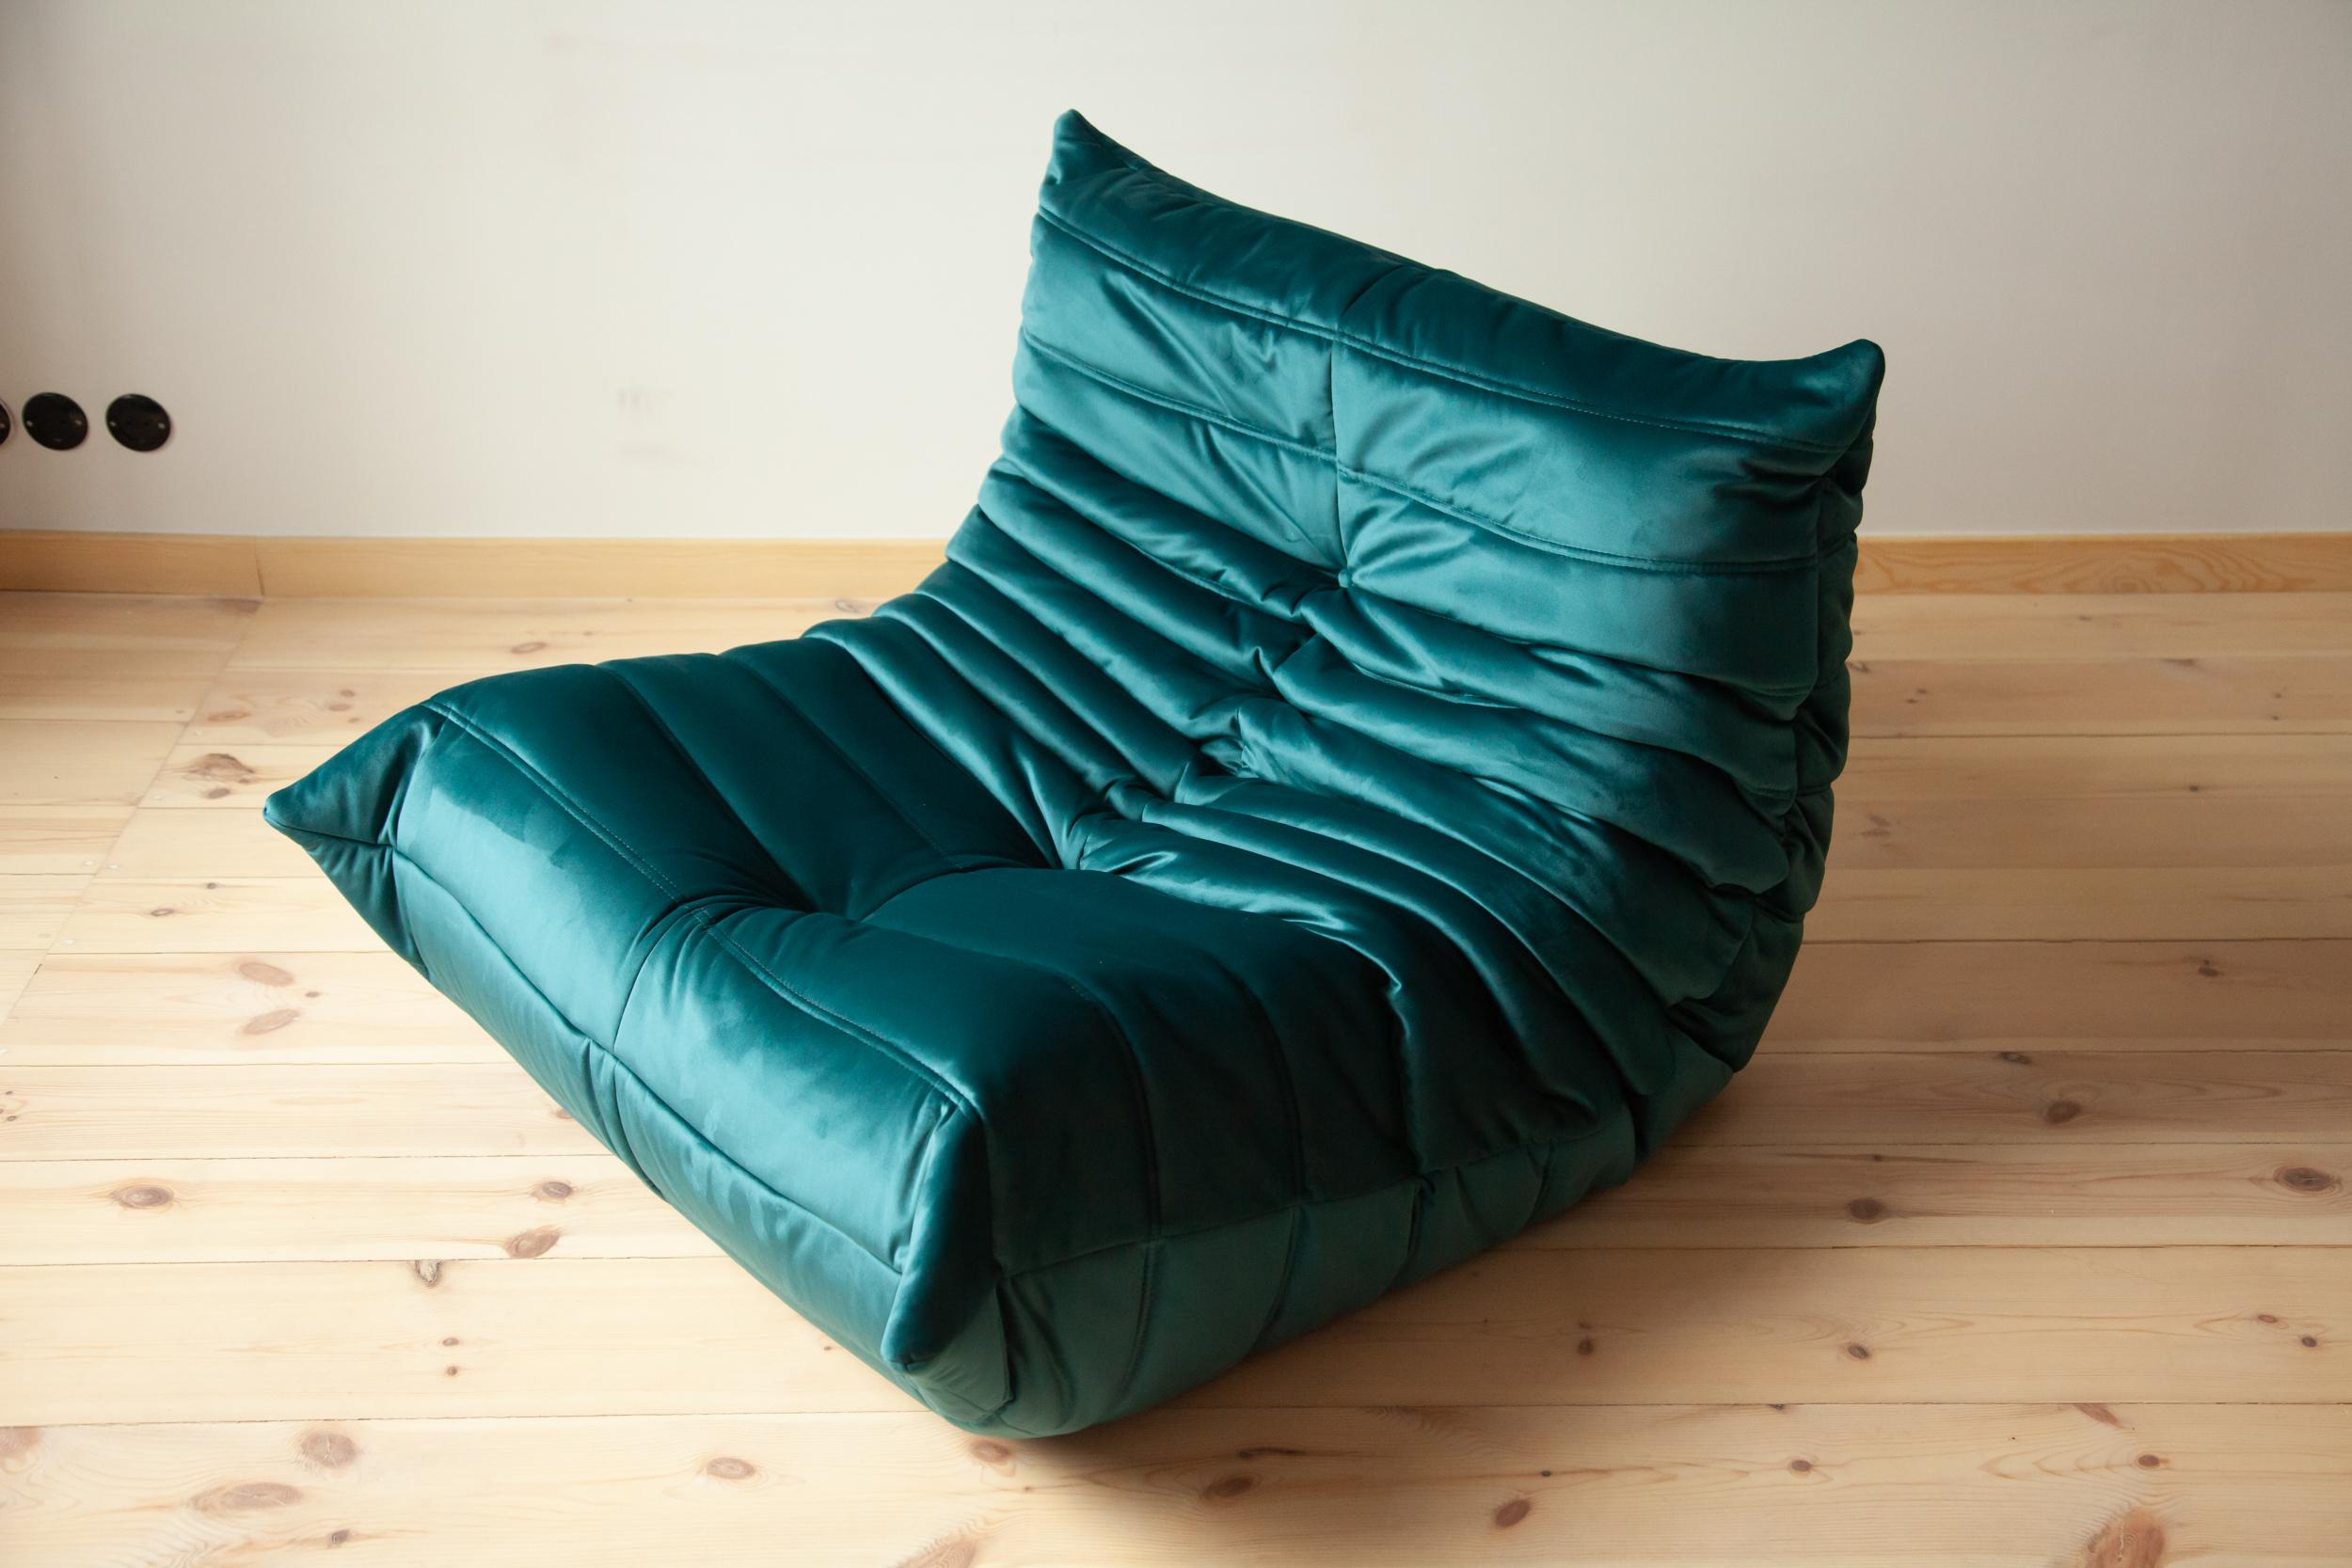 This Togo longue chair was designed by Michel Ducaroy in 1973 and was manufactured by Ligne Roset in France. It has been reupholstered in new blue-green velvet (70 x 87 x 102 cm). It has the original Ligne Roset logo and genuine Ligne Roset bottom.